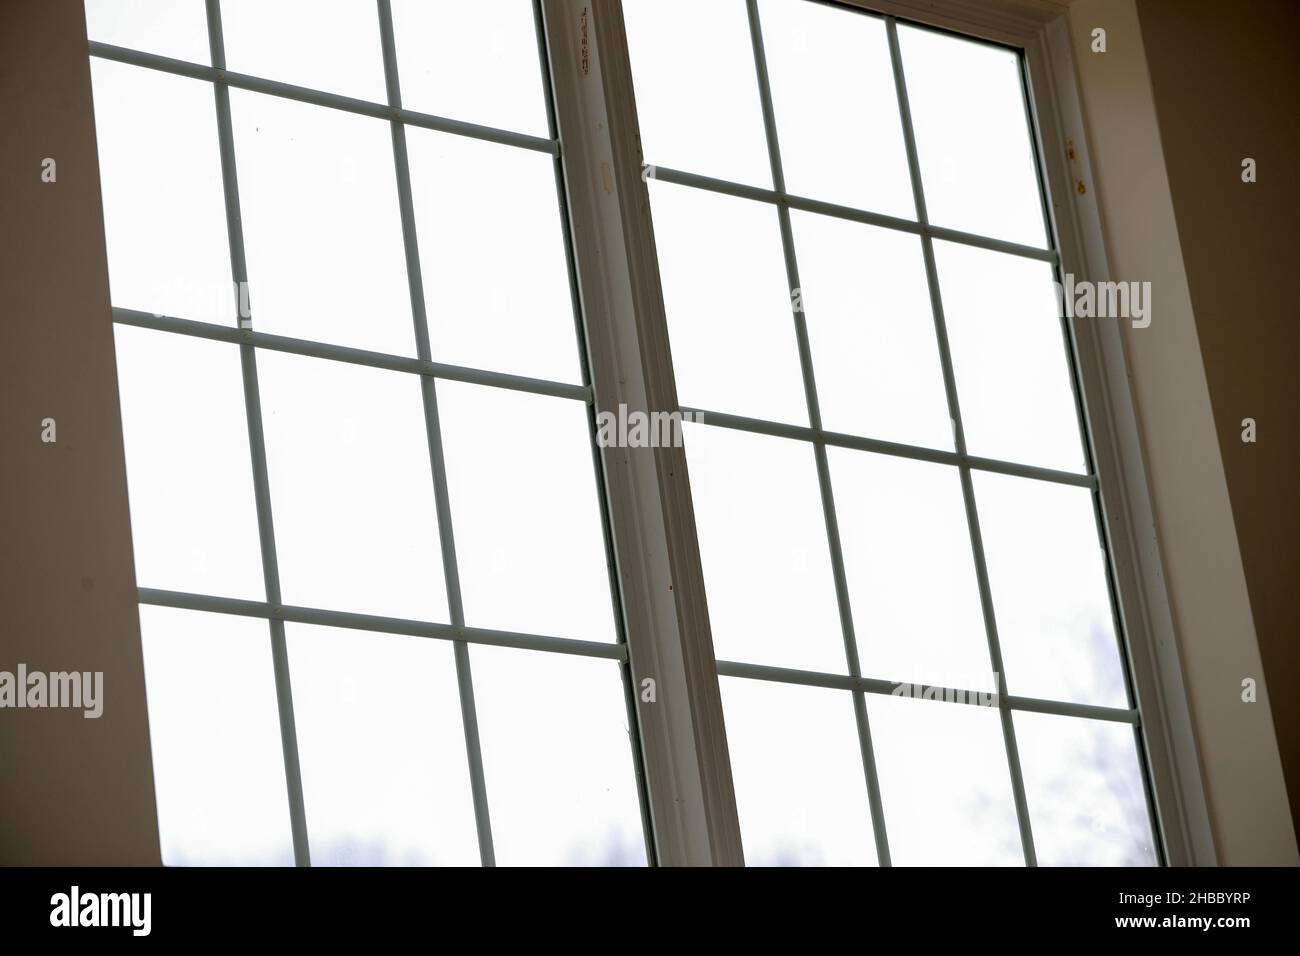 Clear Interior Stainless Steel Window Background - Image Stock Photo